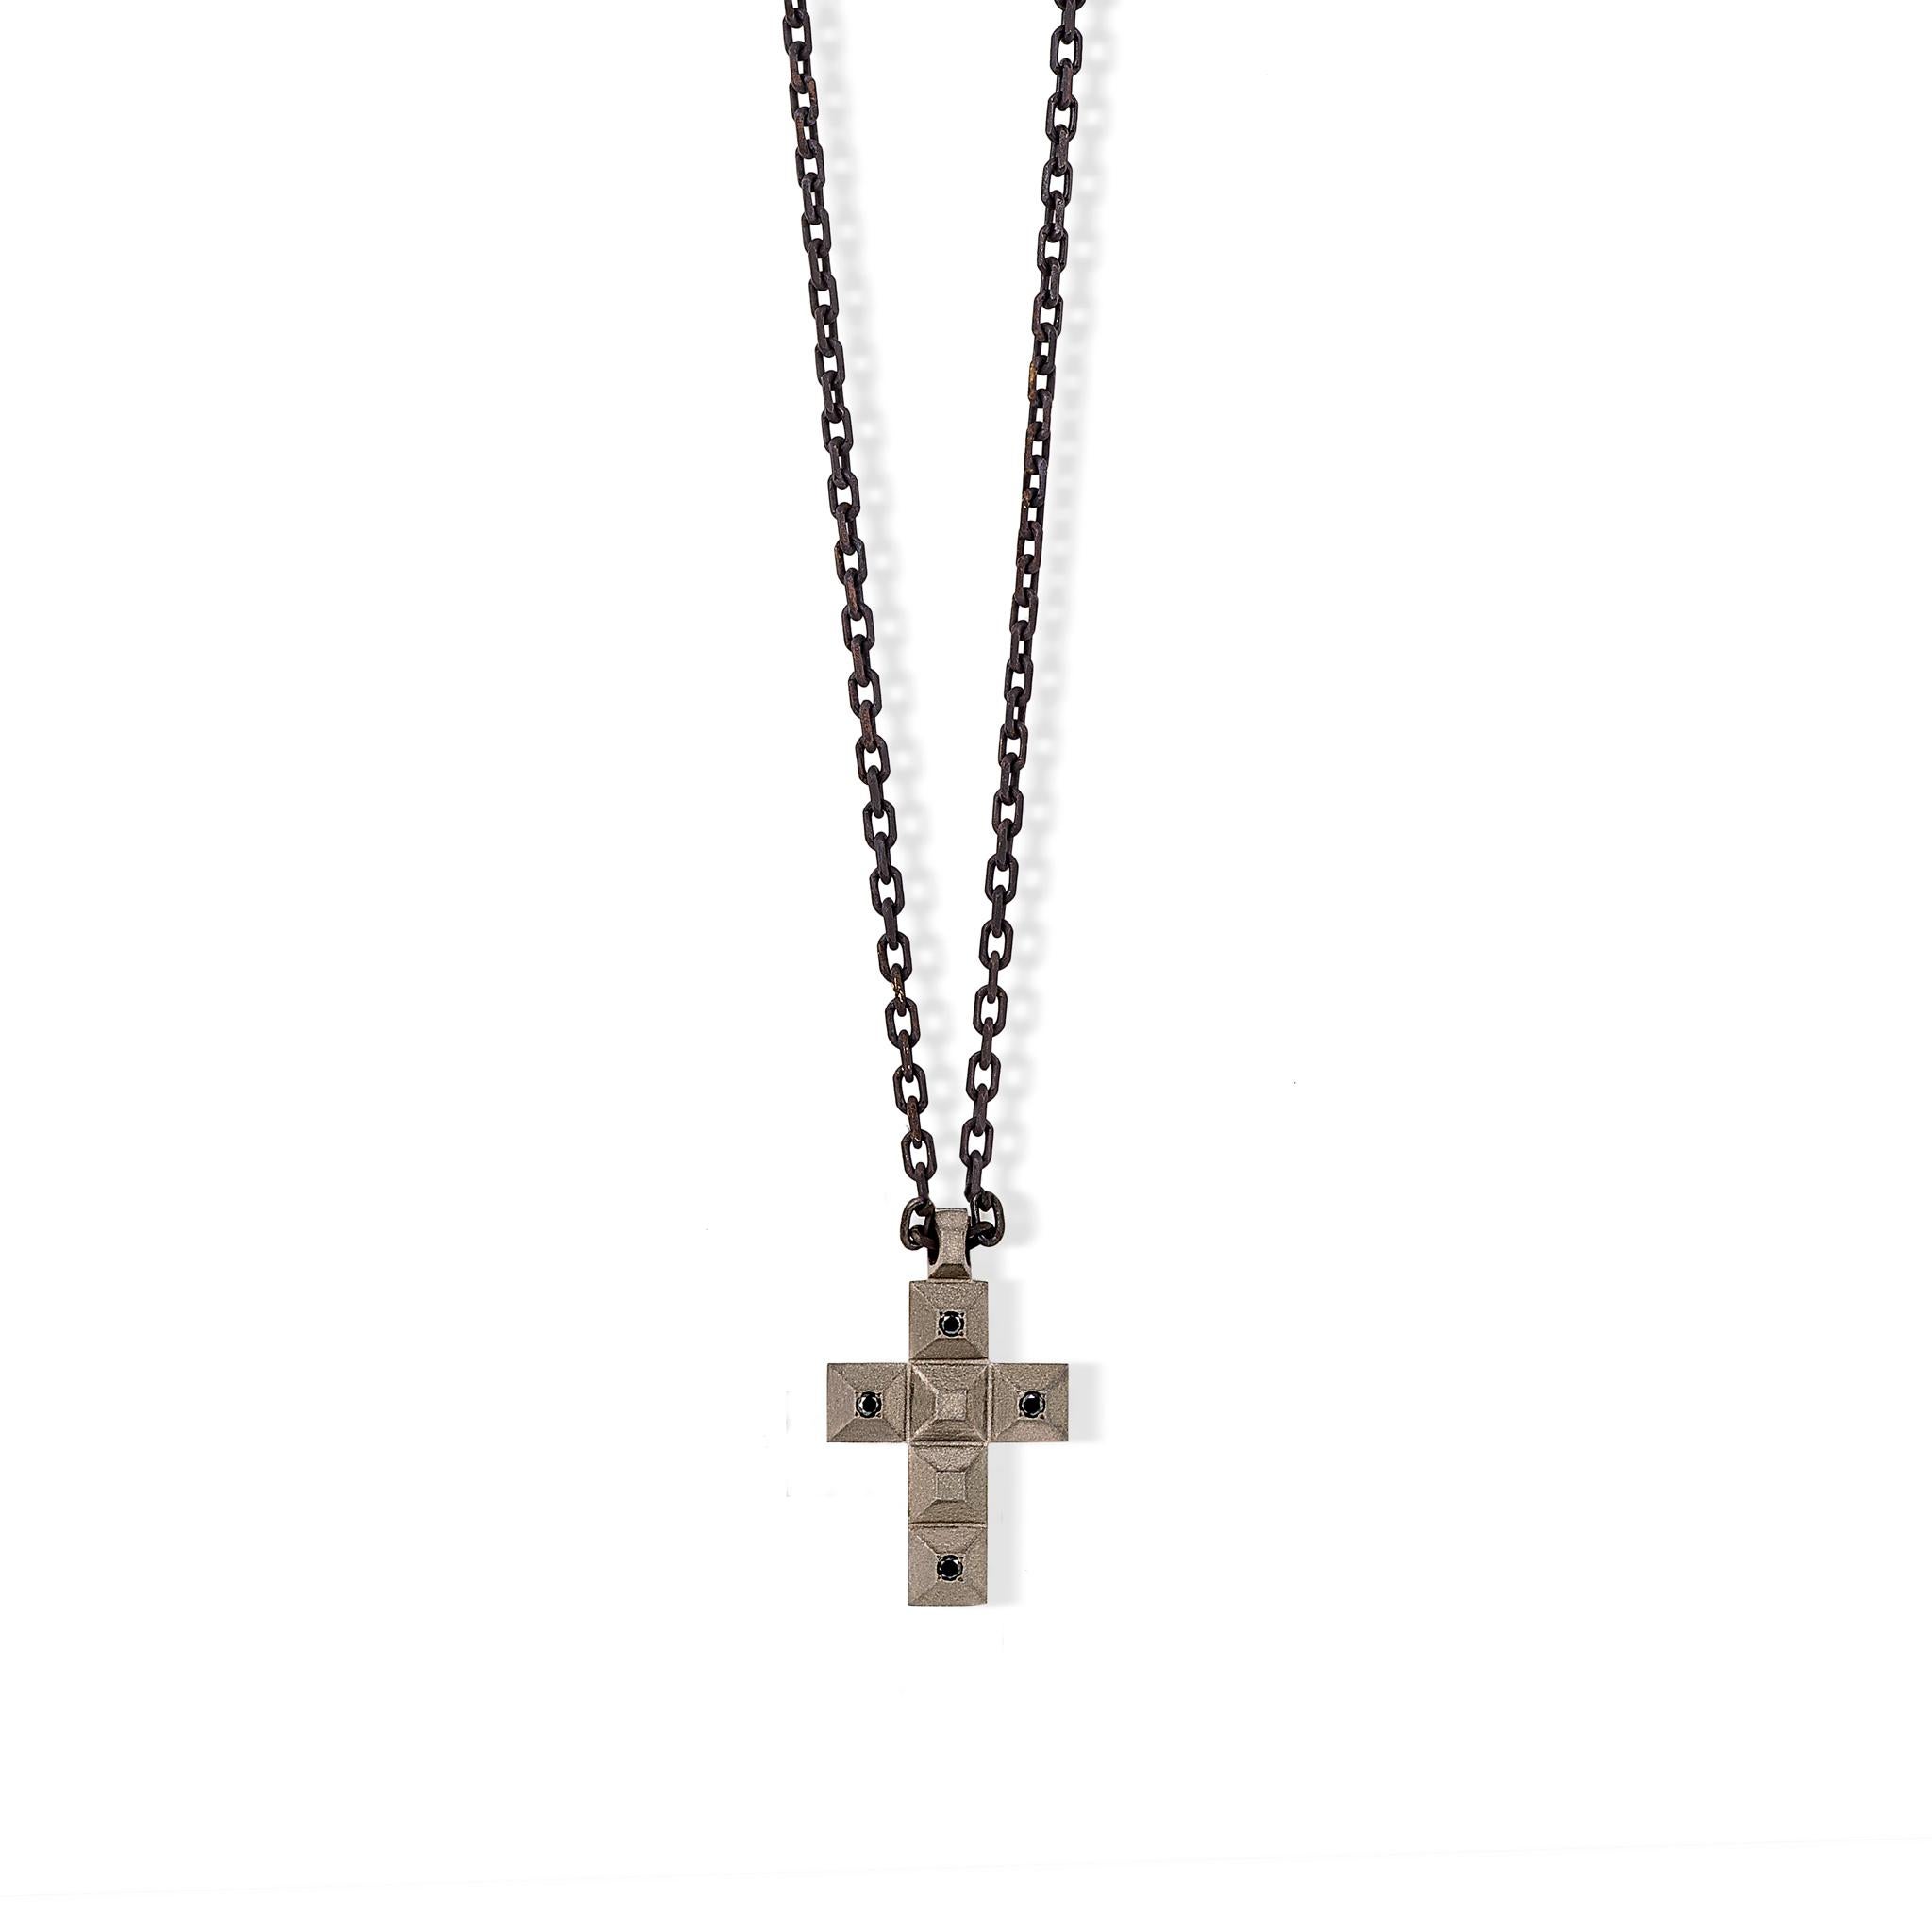 Men's Linea Watt necklace in titanium, black diamonds and 9 kt red gold. The star of this necklace is the cross consisting of six small titanium studs. Set above the outer studs are 4 black diamonds for a total carat of 4 points. The chain slides